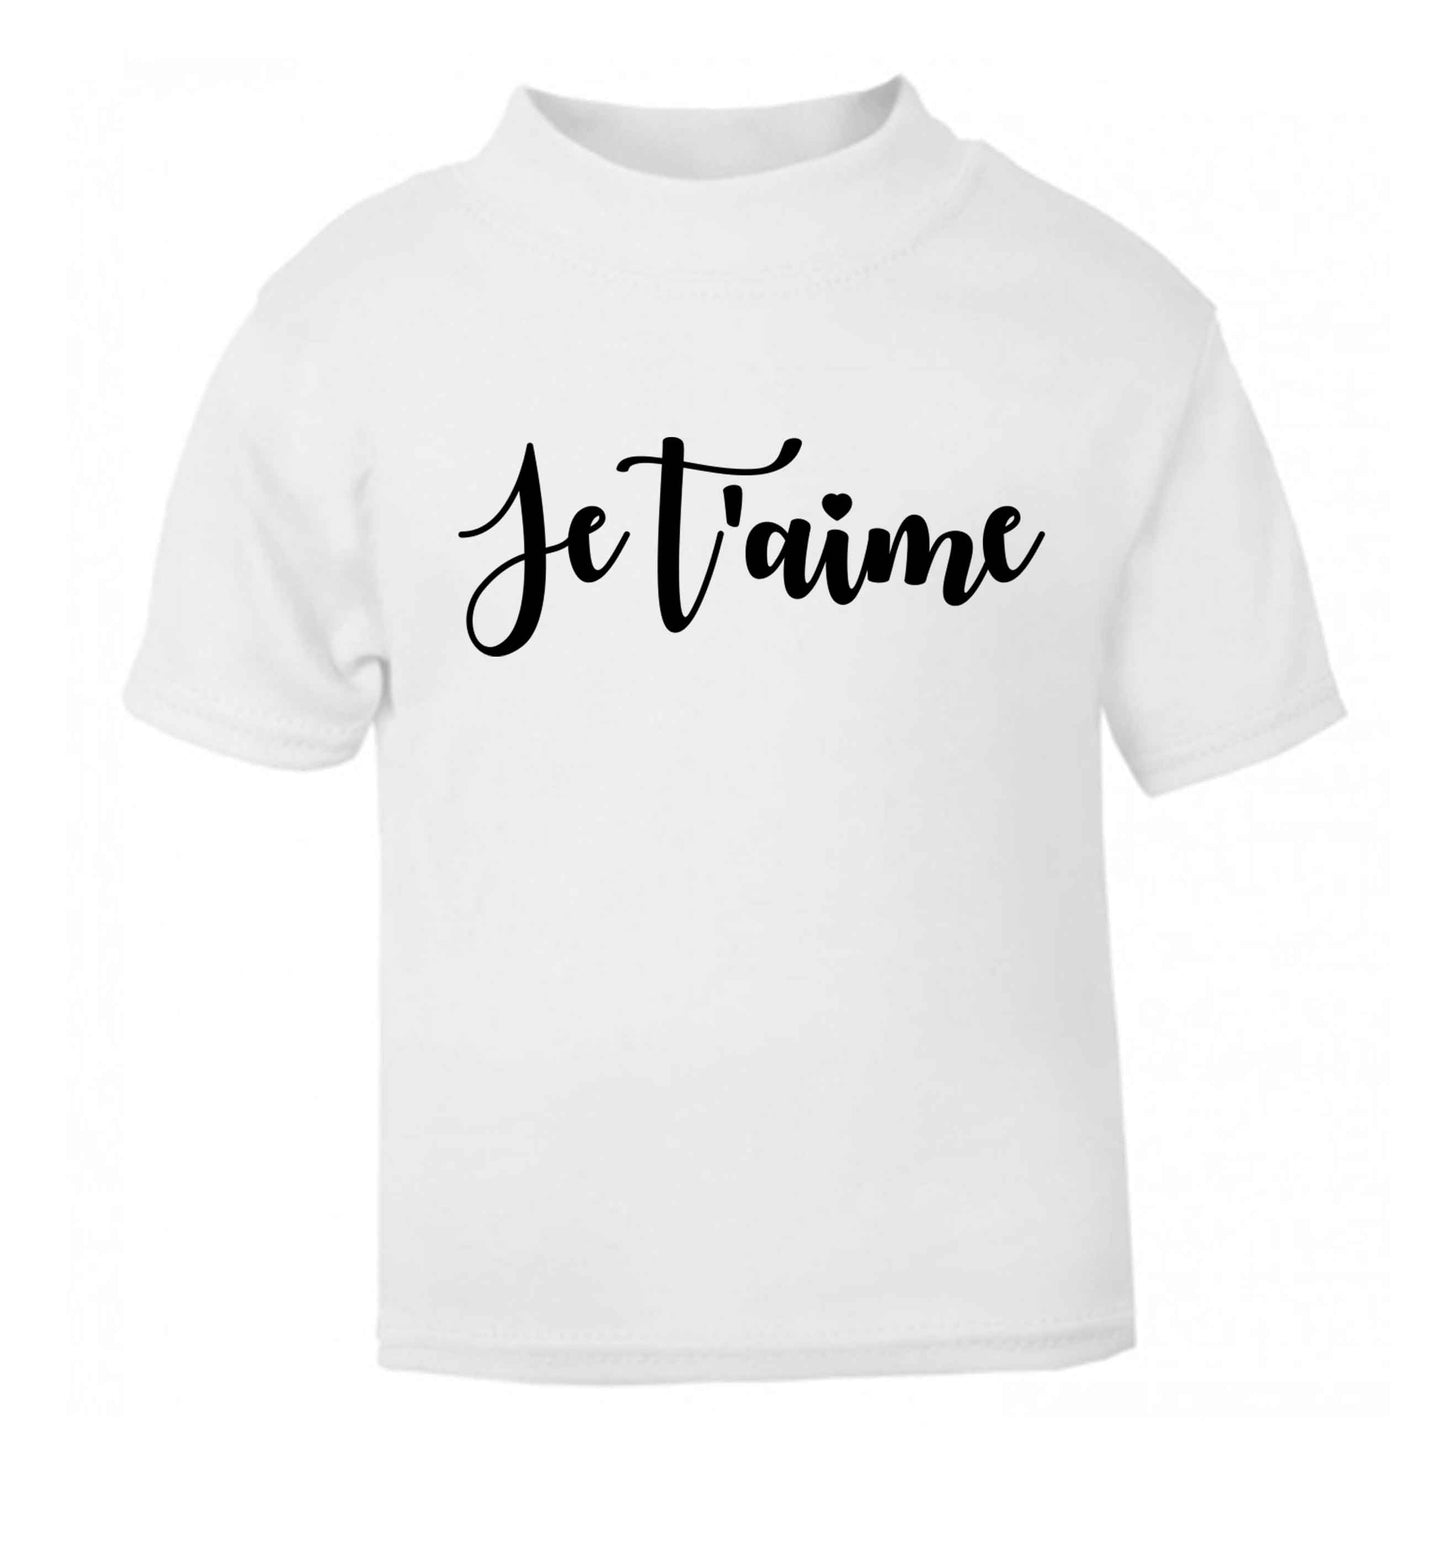 Je t'aime white baby toddler Tshirt 2 Years